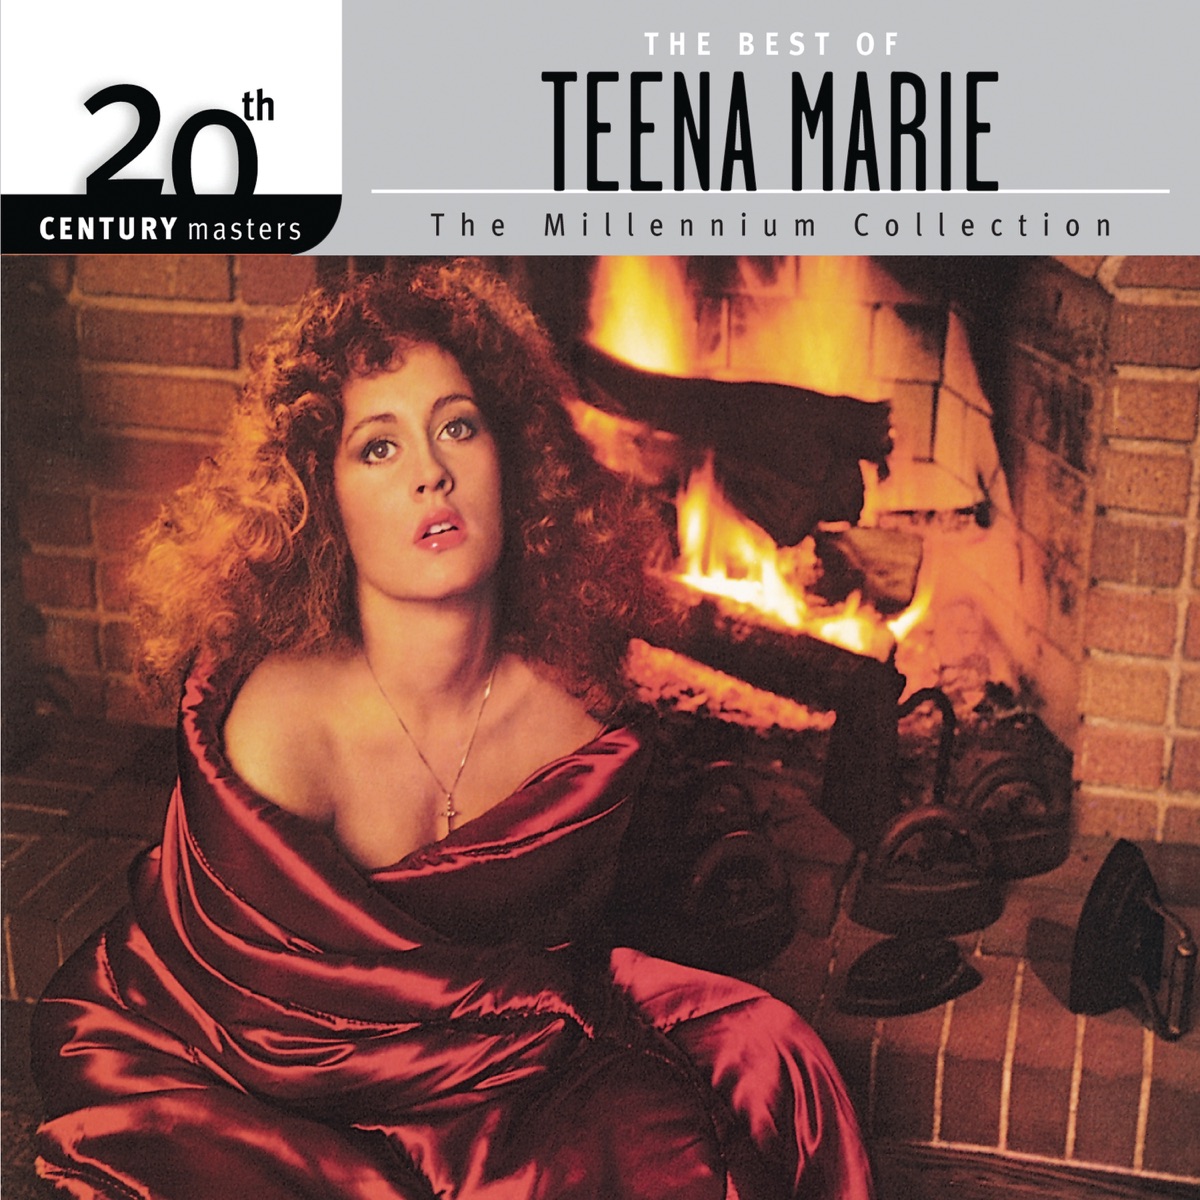 Naked to the World by Teena Marie on Apple Music